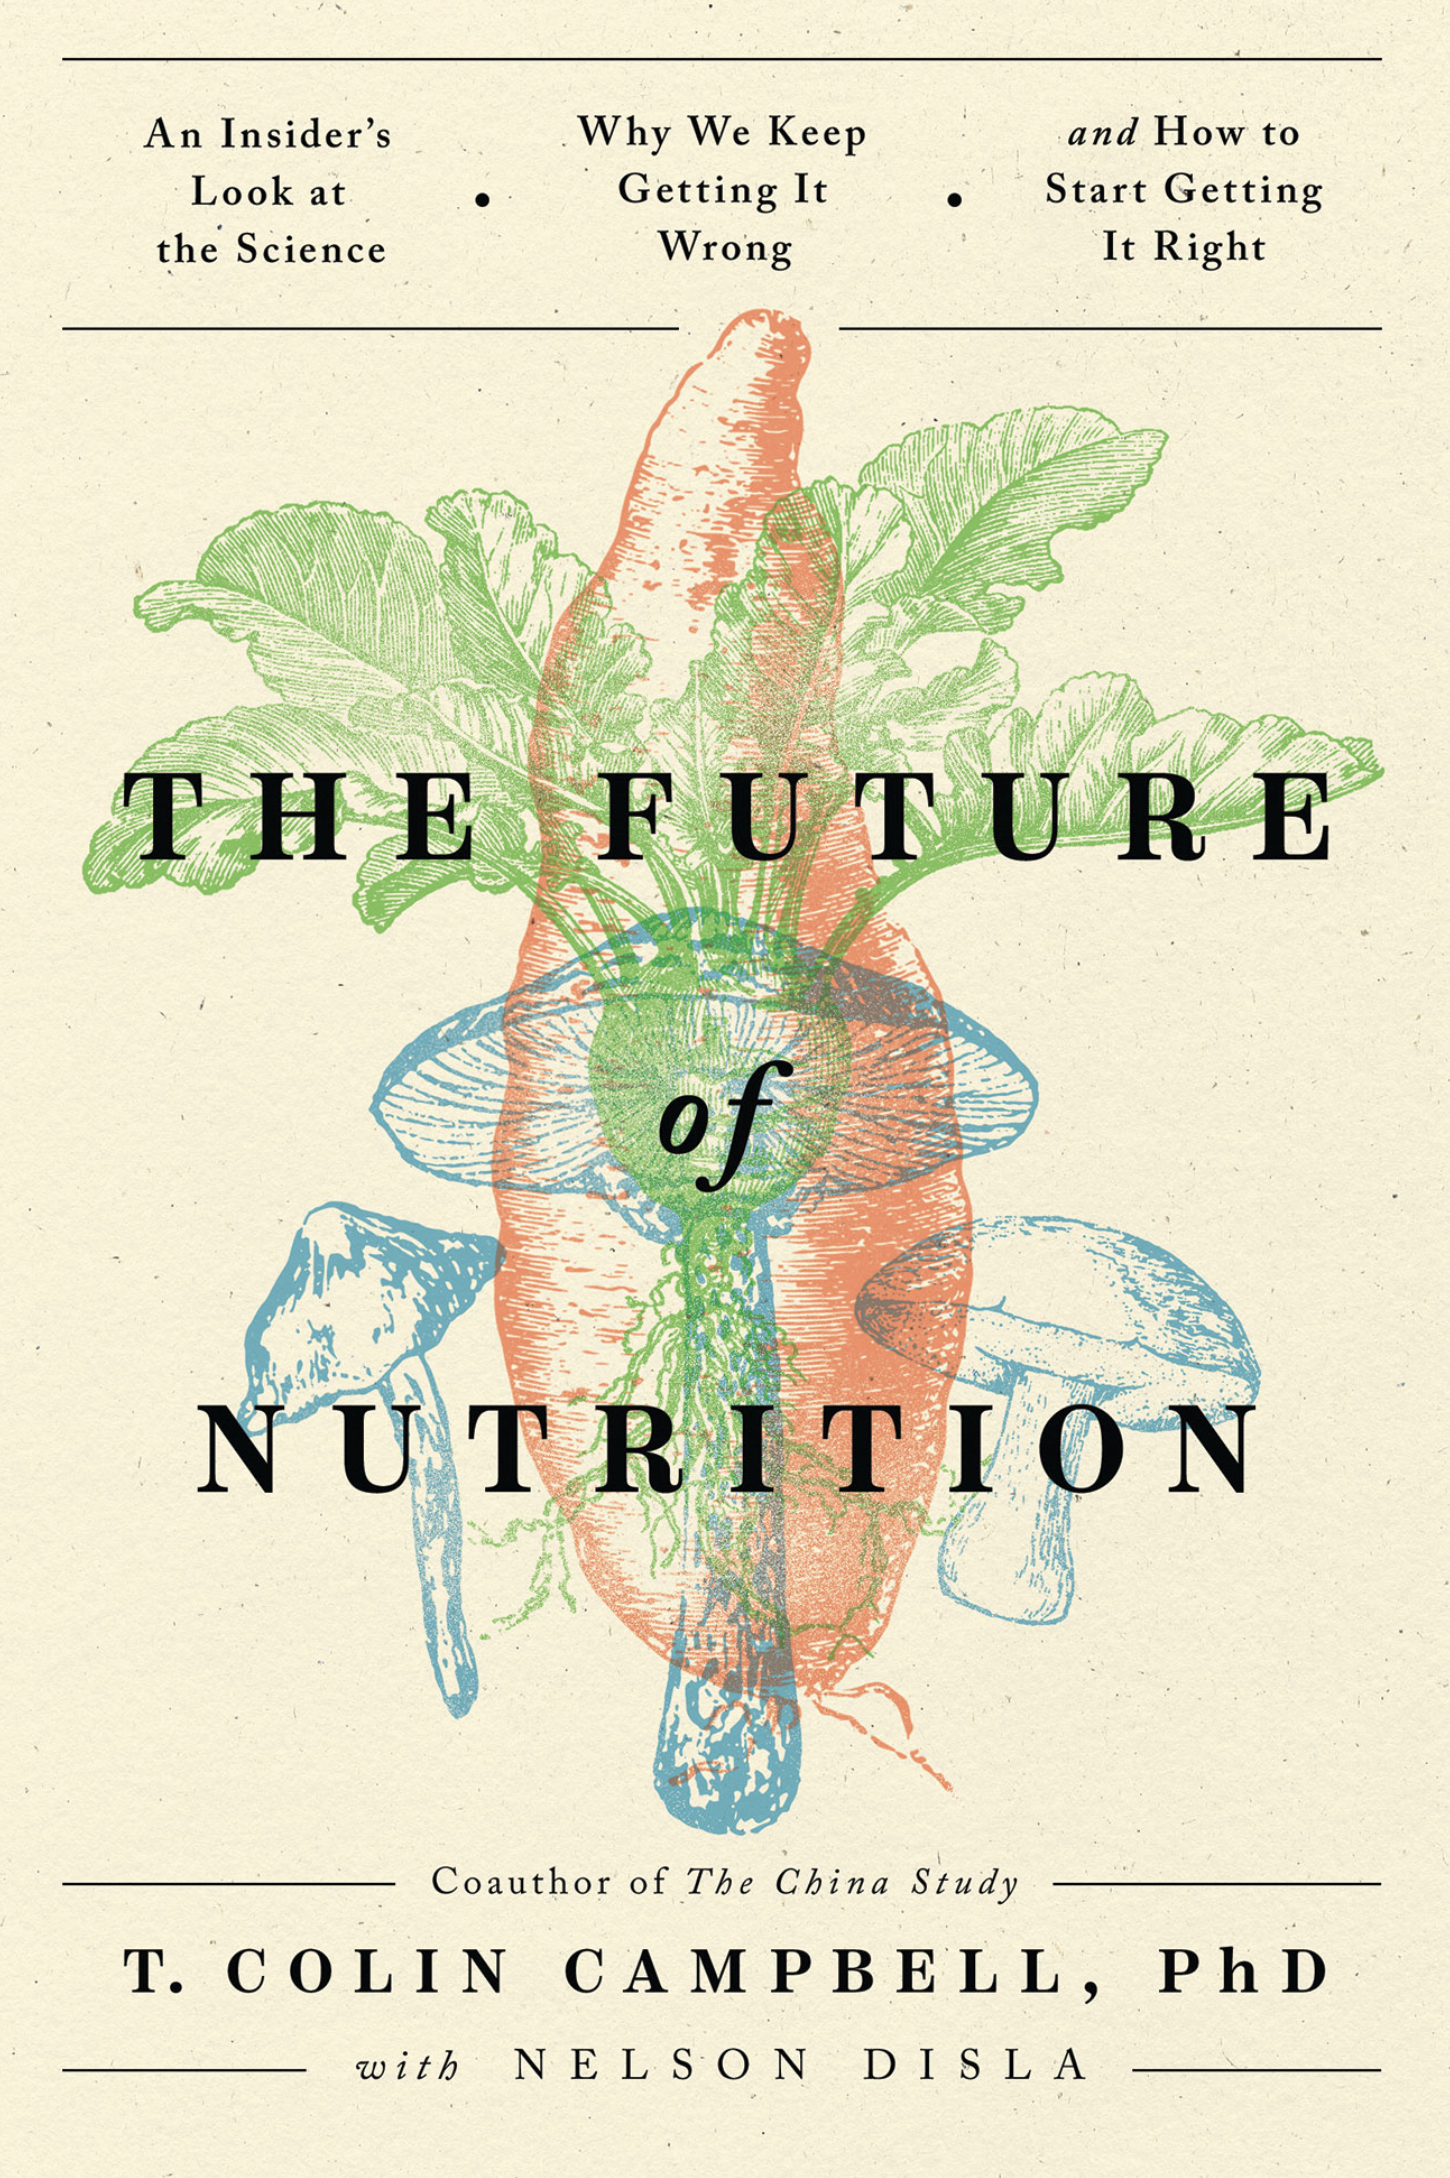 The Future of Nutrition book cover